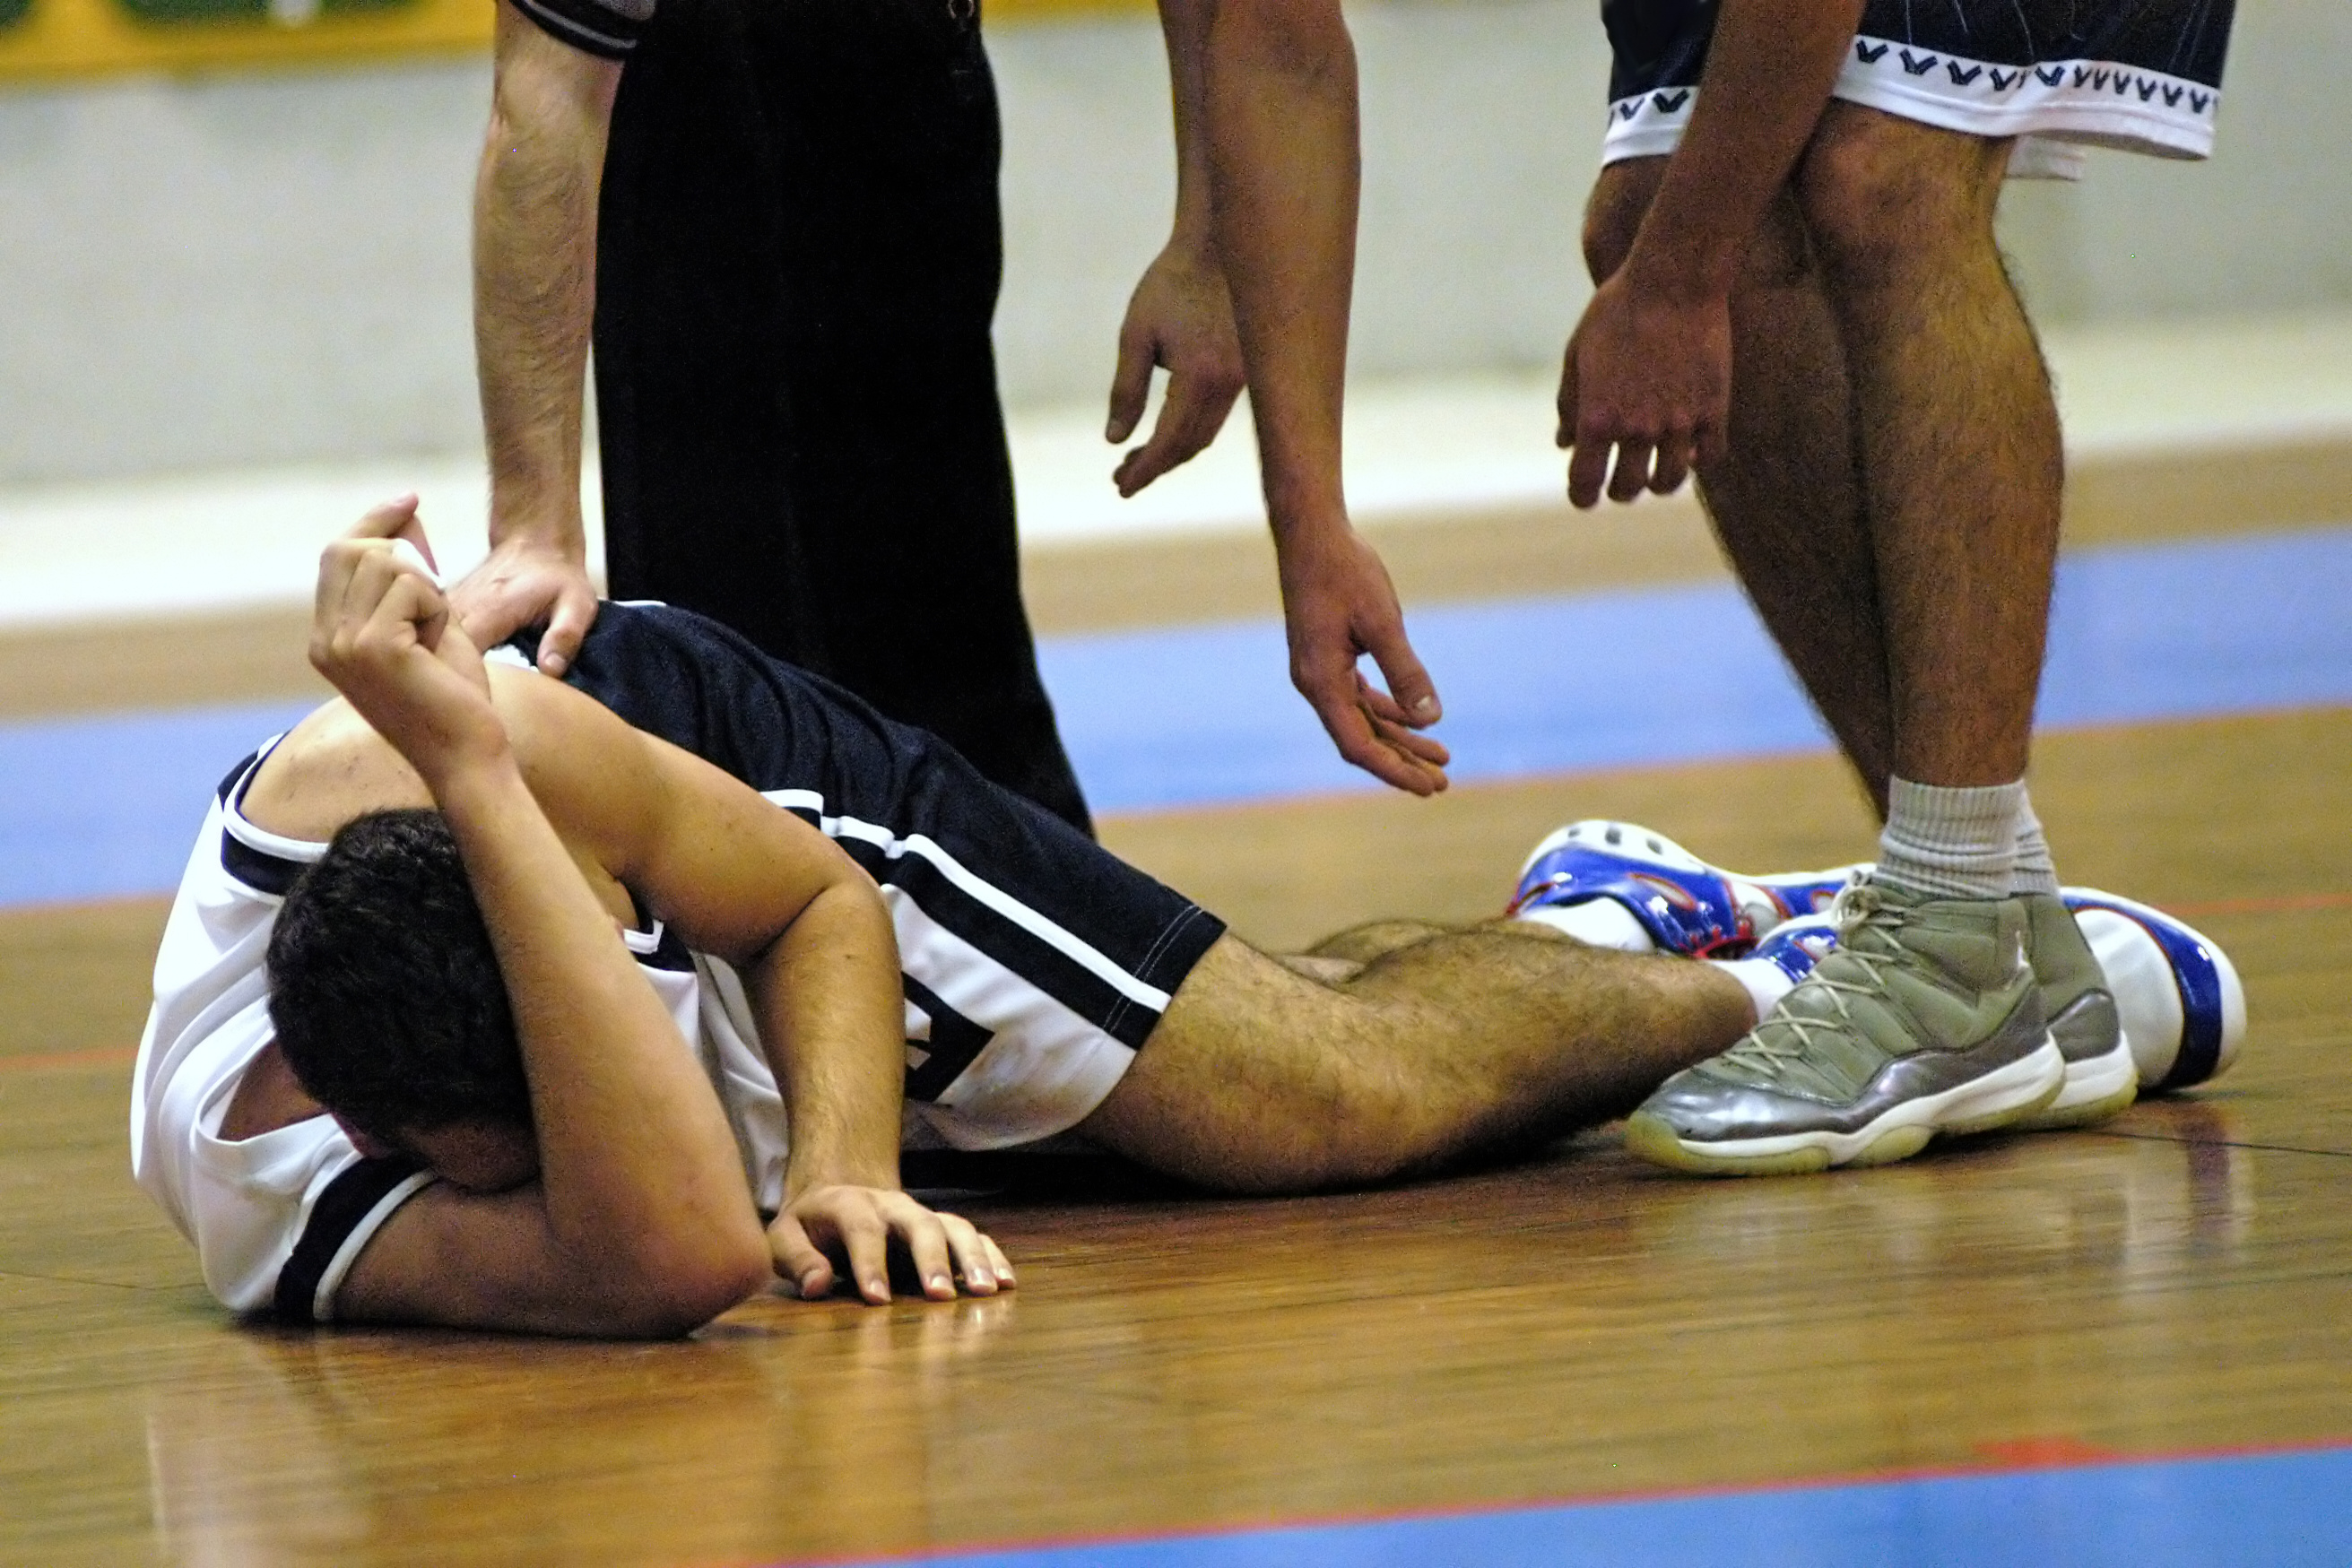 Sport Injuries | Common Sports Injuries & Their Prevention